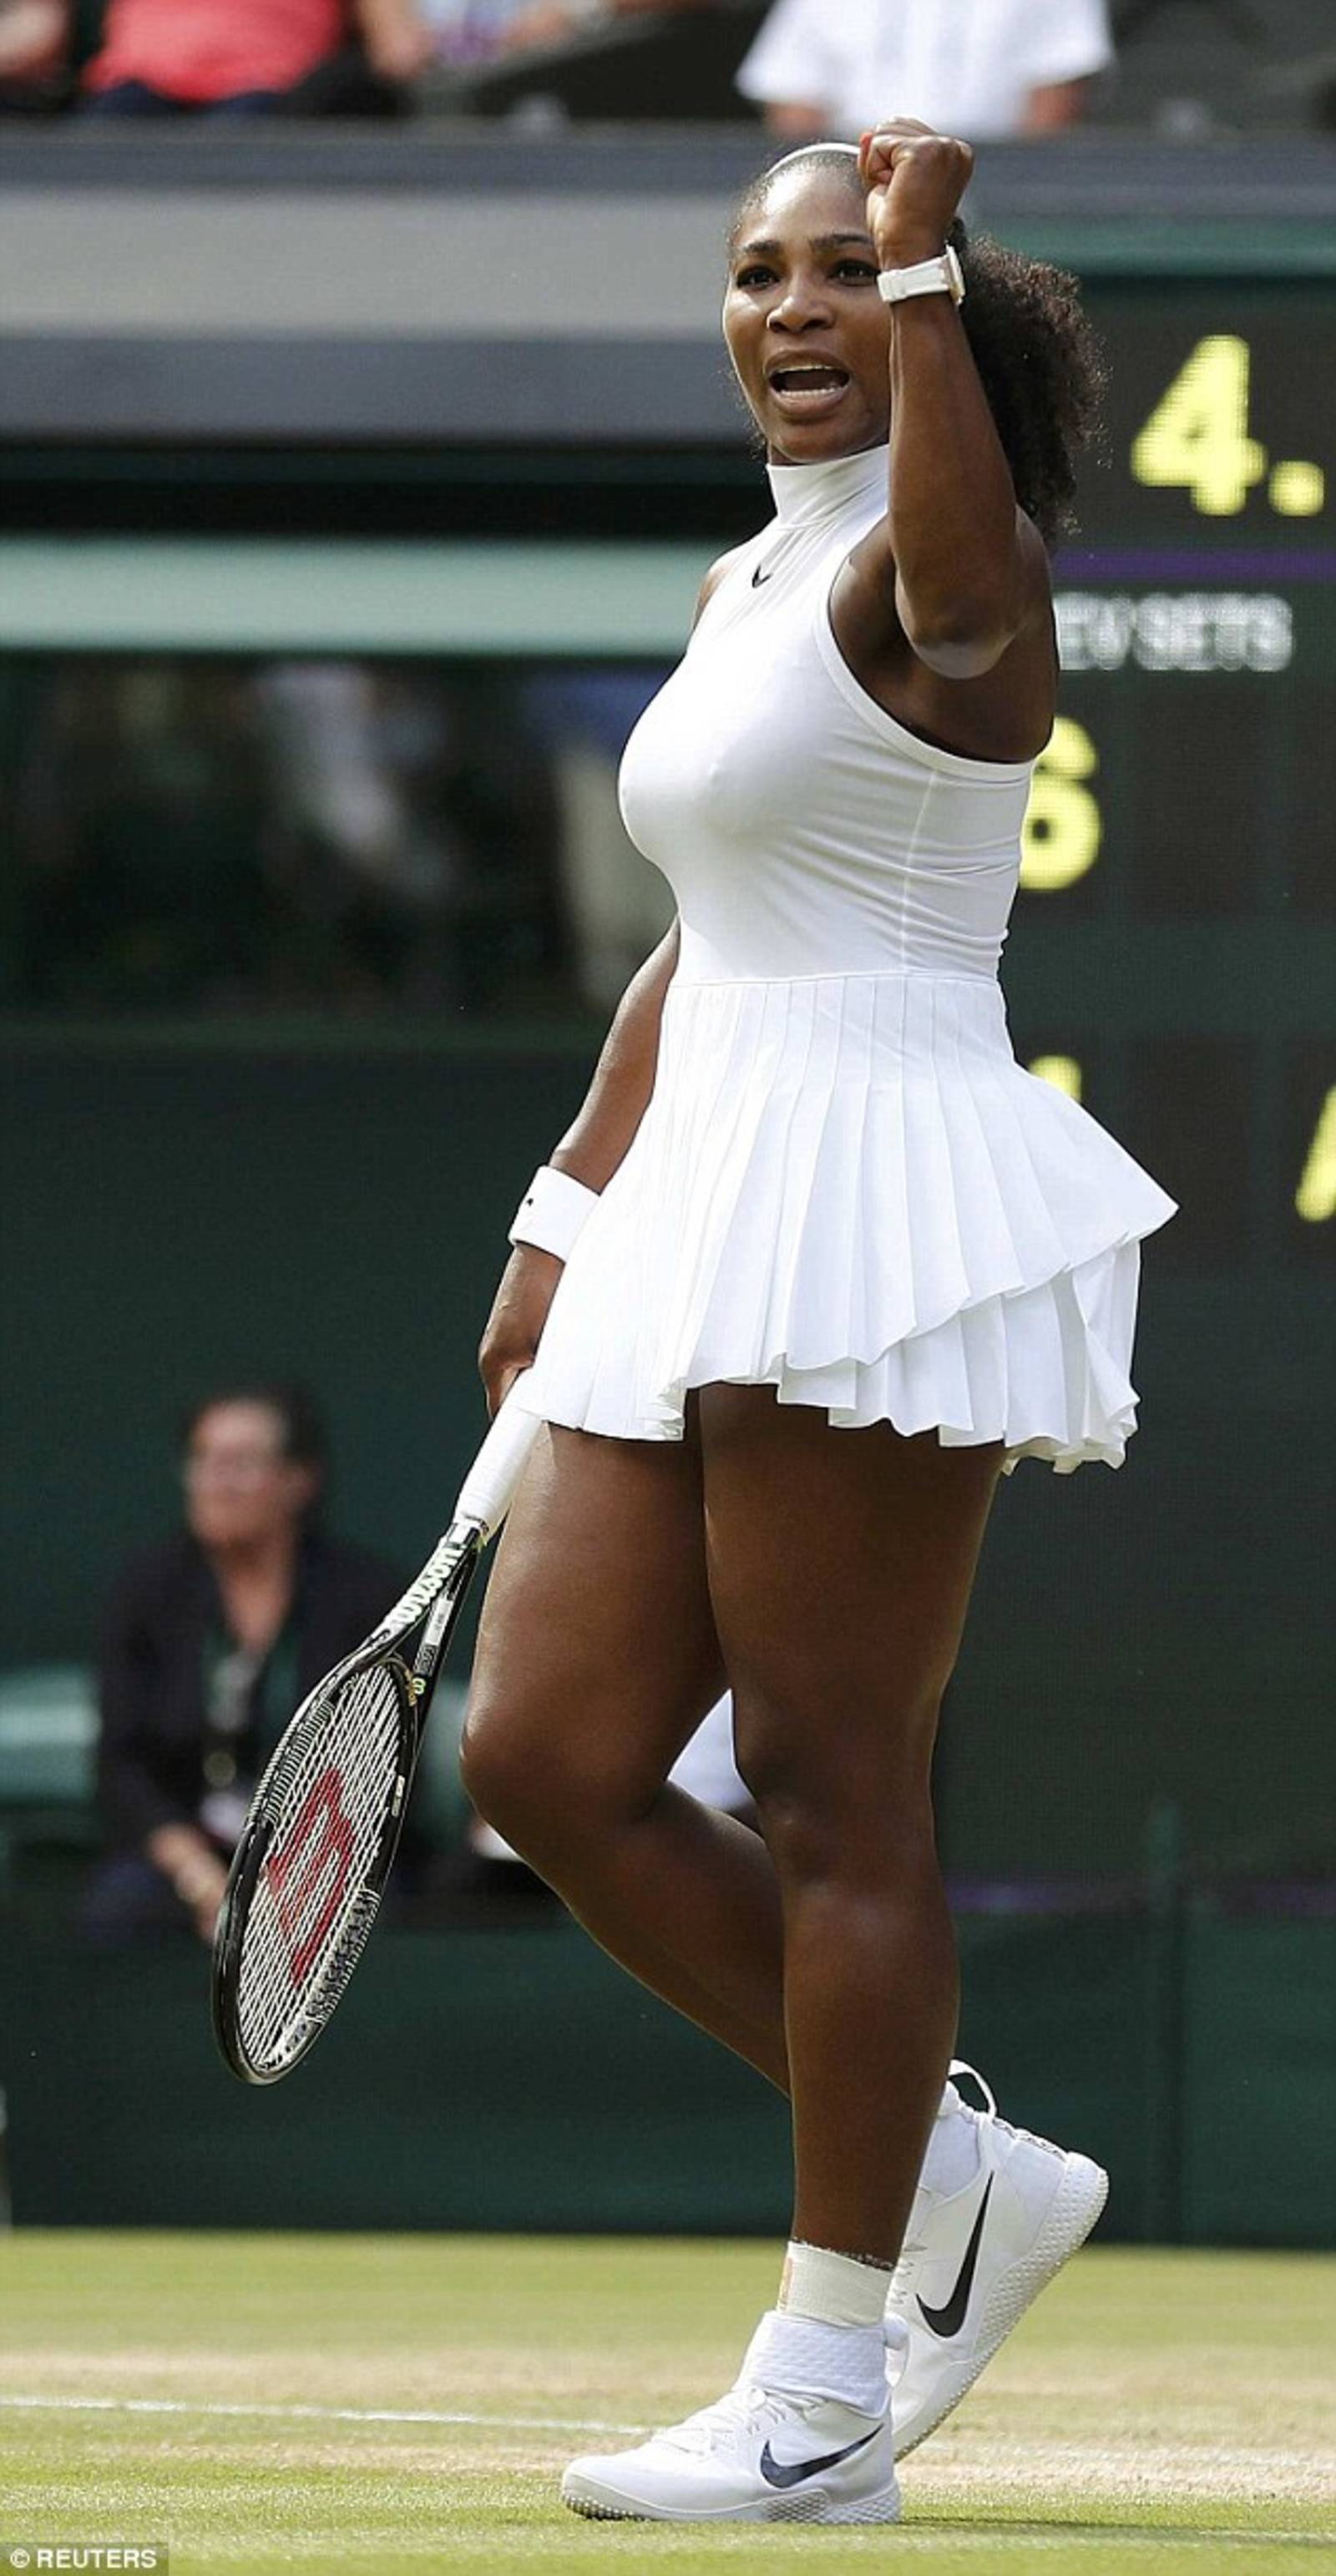 Serena Williams just made her way to the Wimbledon finals